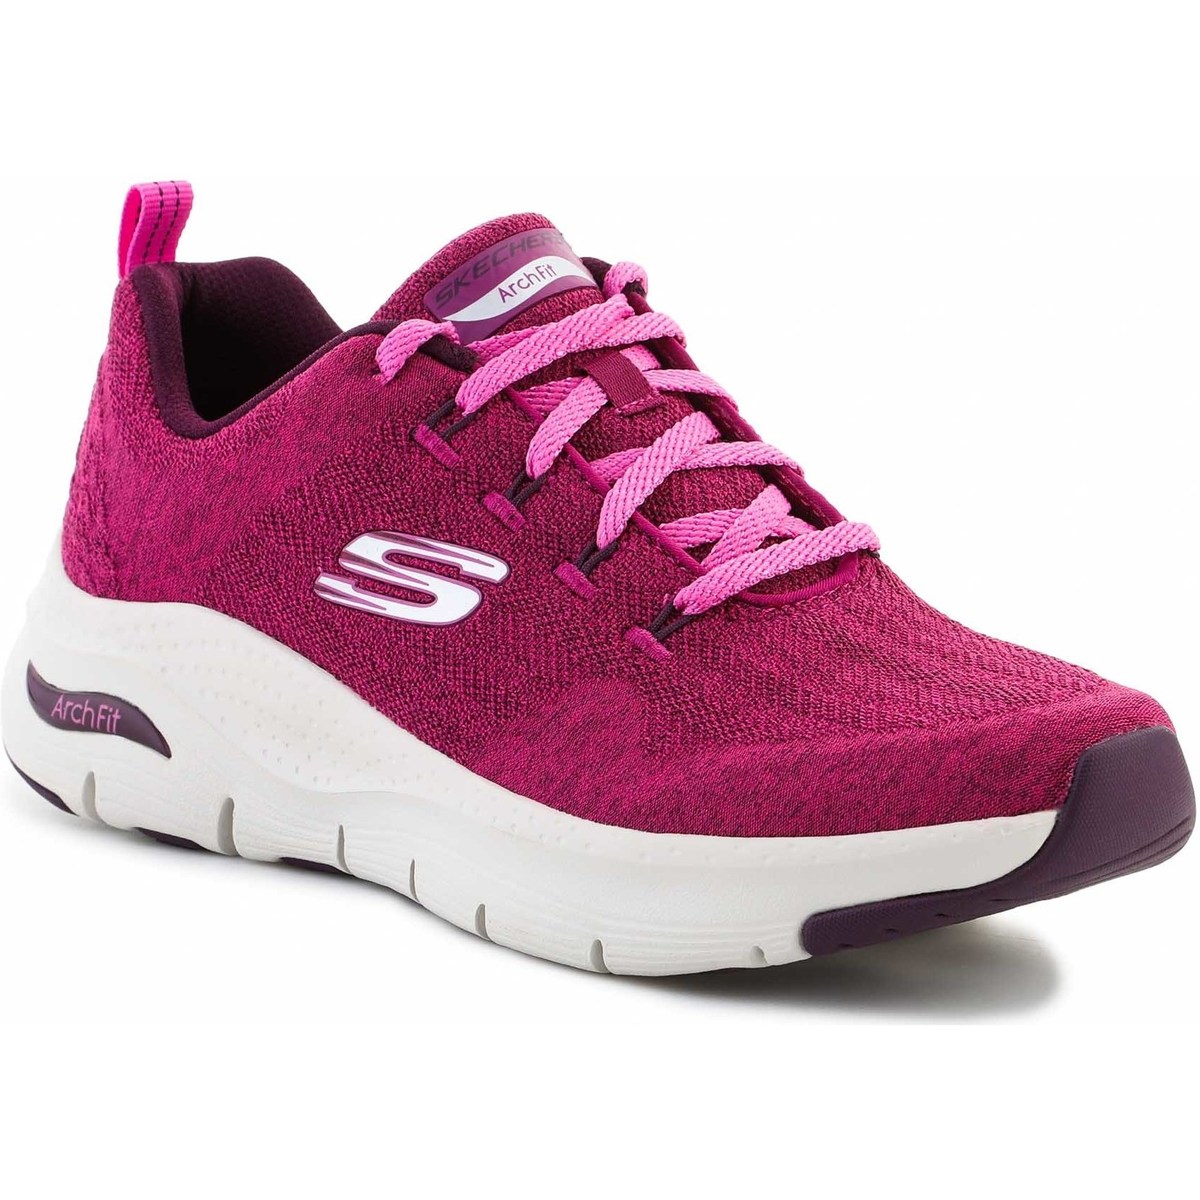 Fitness Skechers Arch Fit Comfy Wave Raspberry 149414-RAS